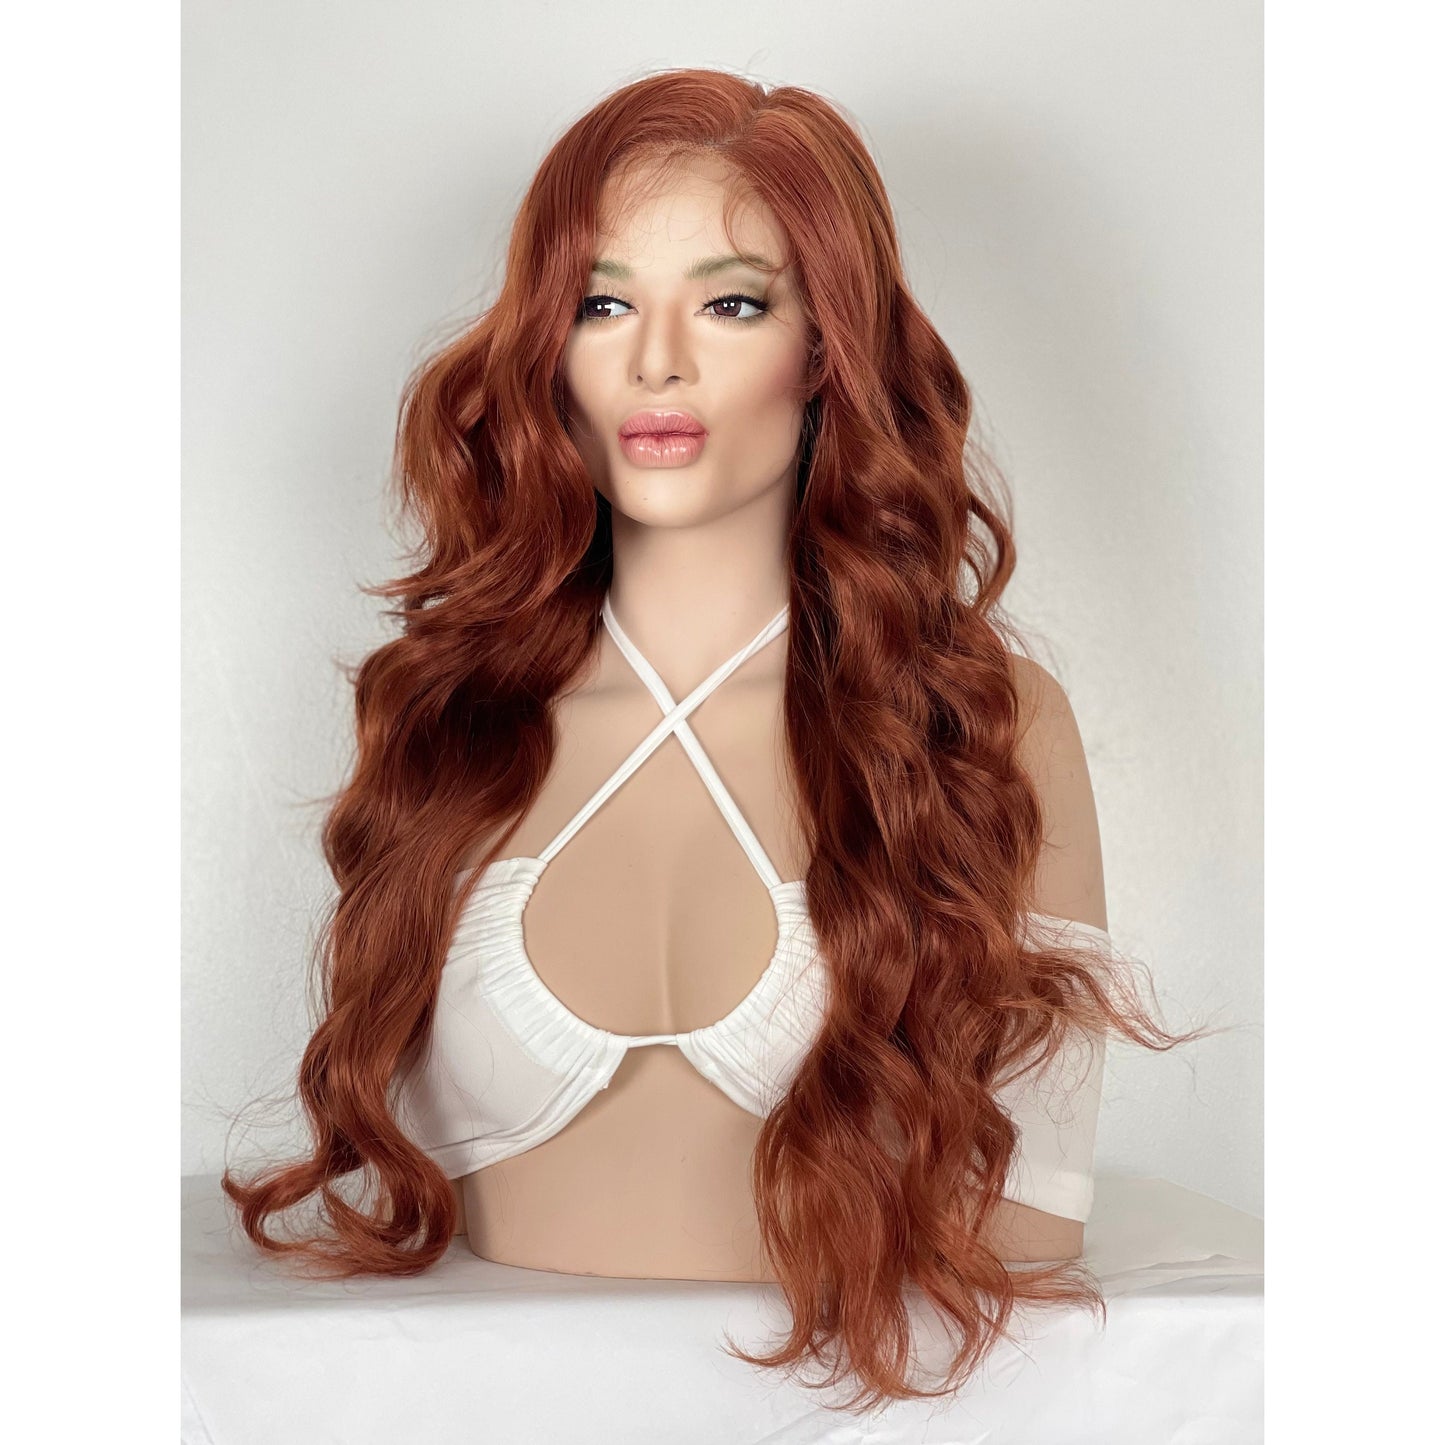 Ginger Copper Red 13x6 wide part lace front wig / Red Wave Luxury Human Hair Blend Wig